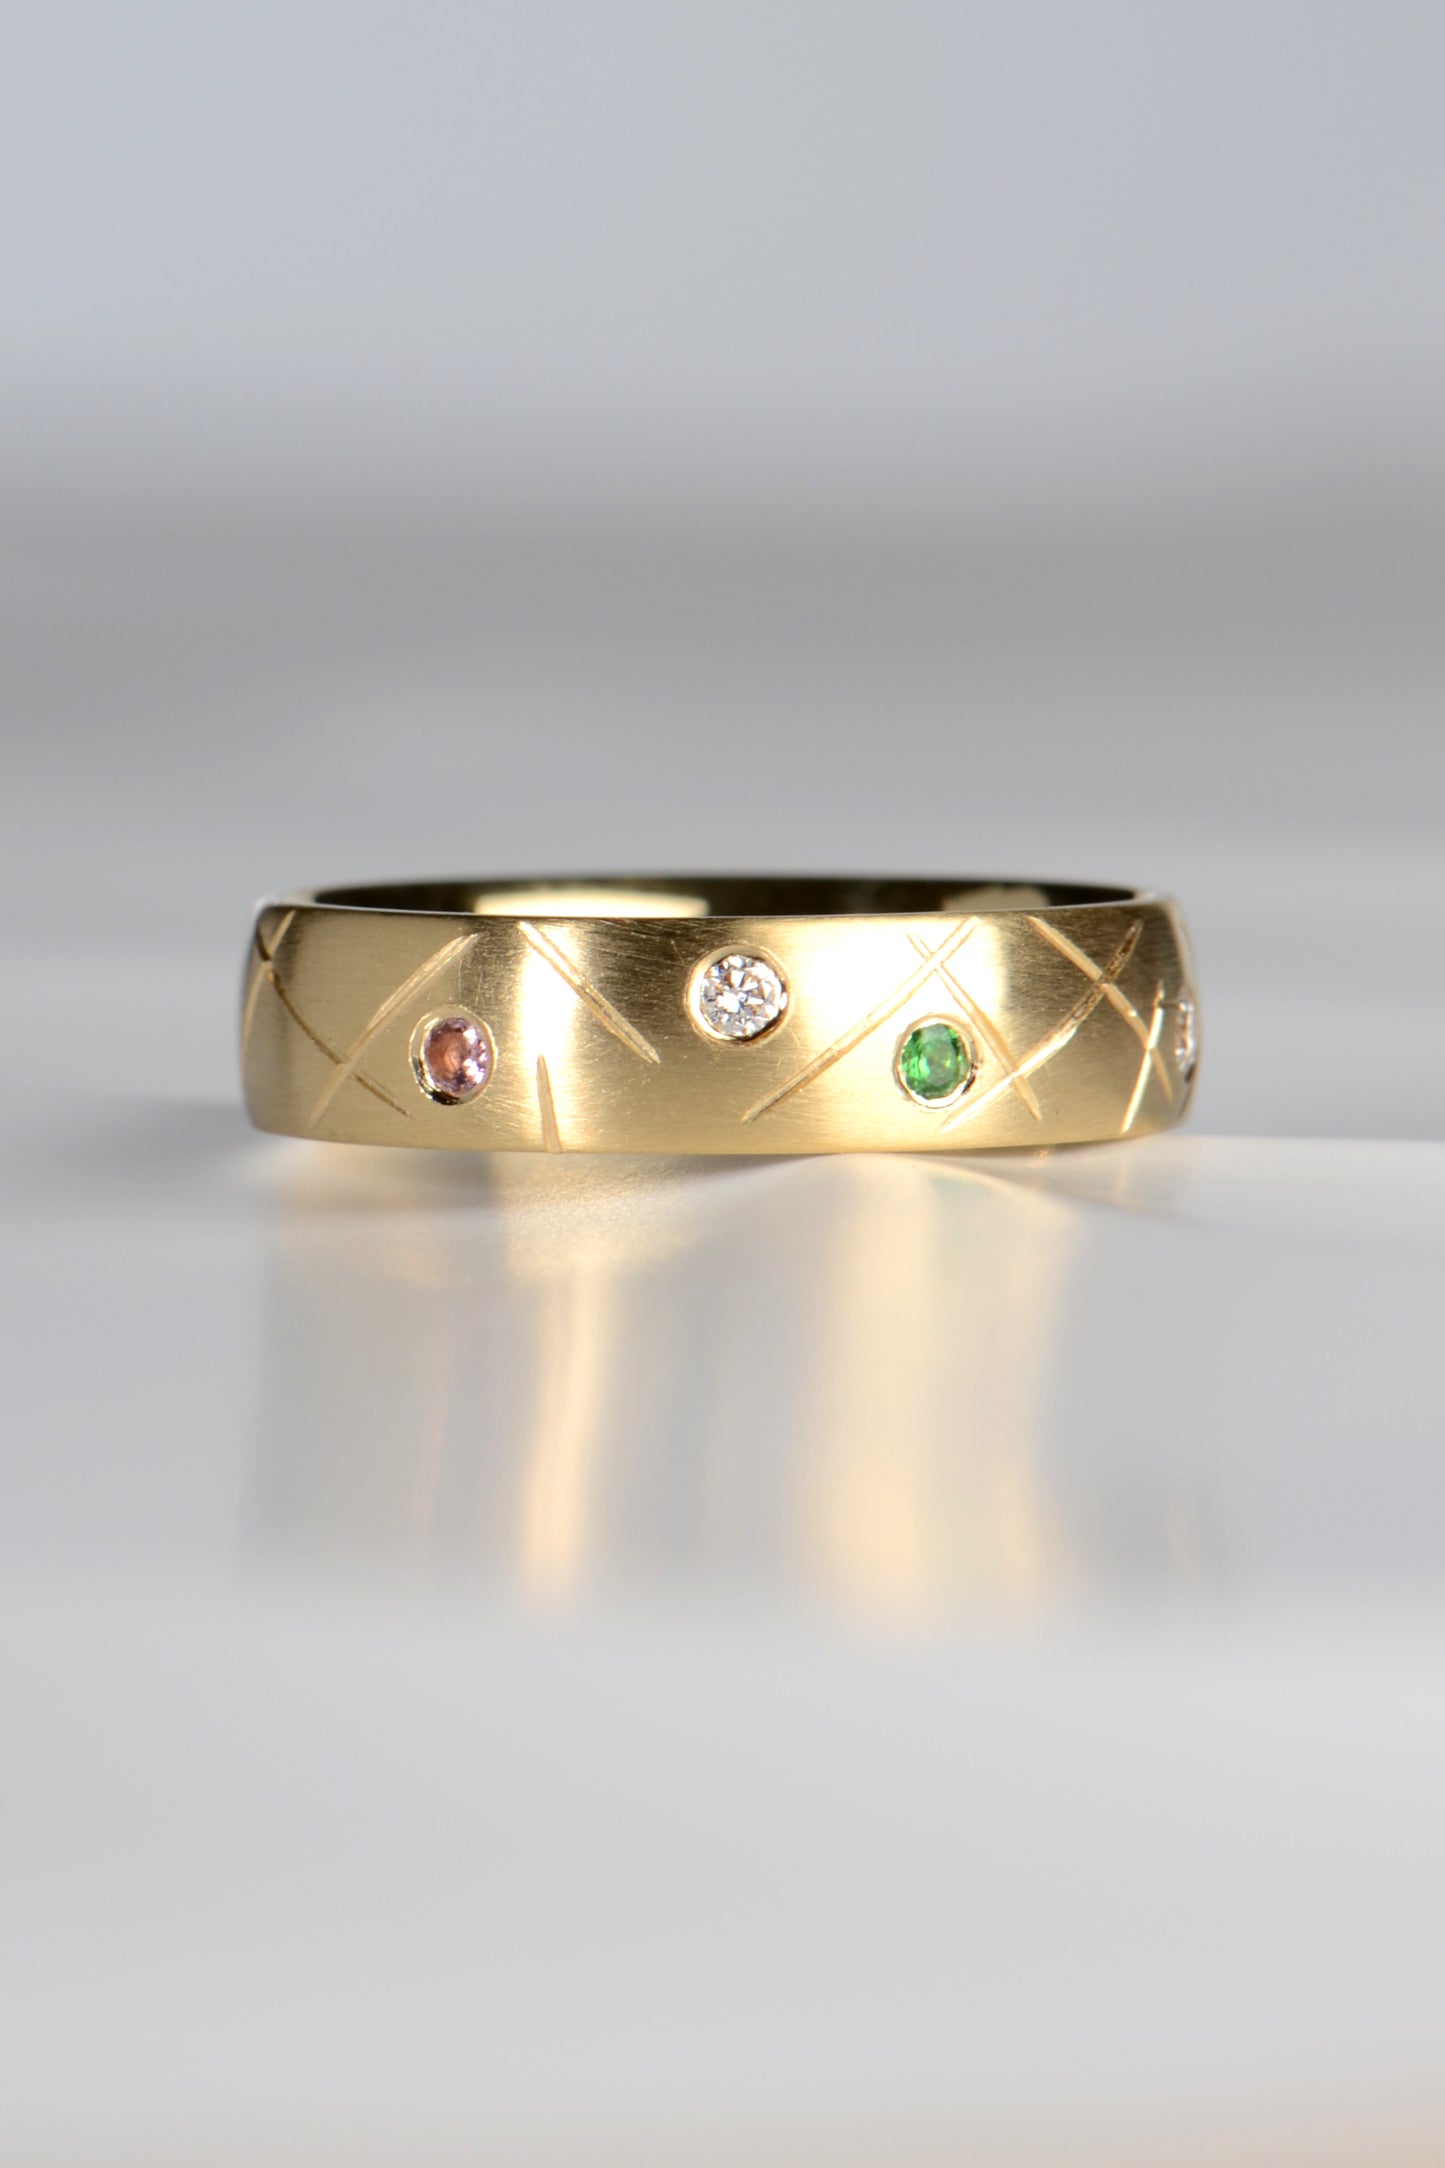 Afternoon Tea hundreds and thousands 18ct gold ring